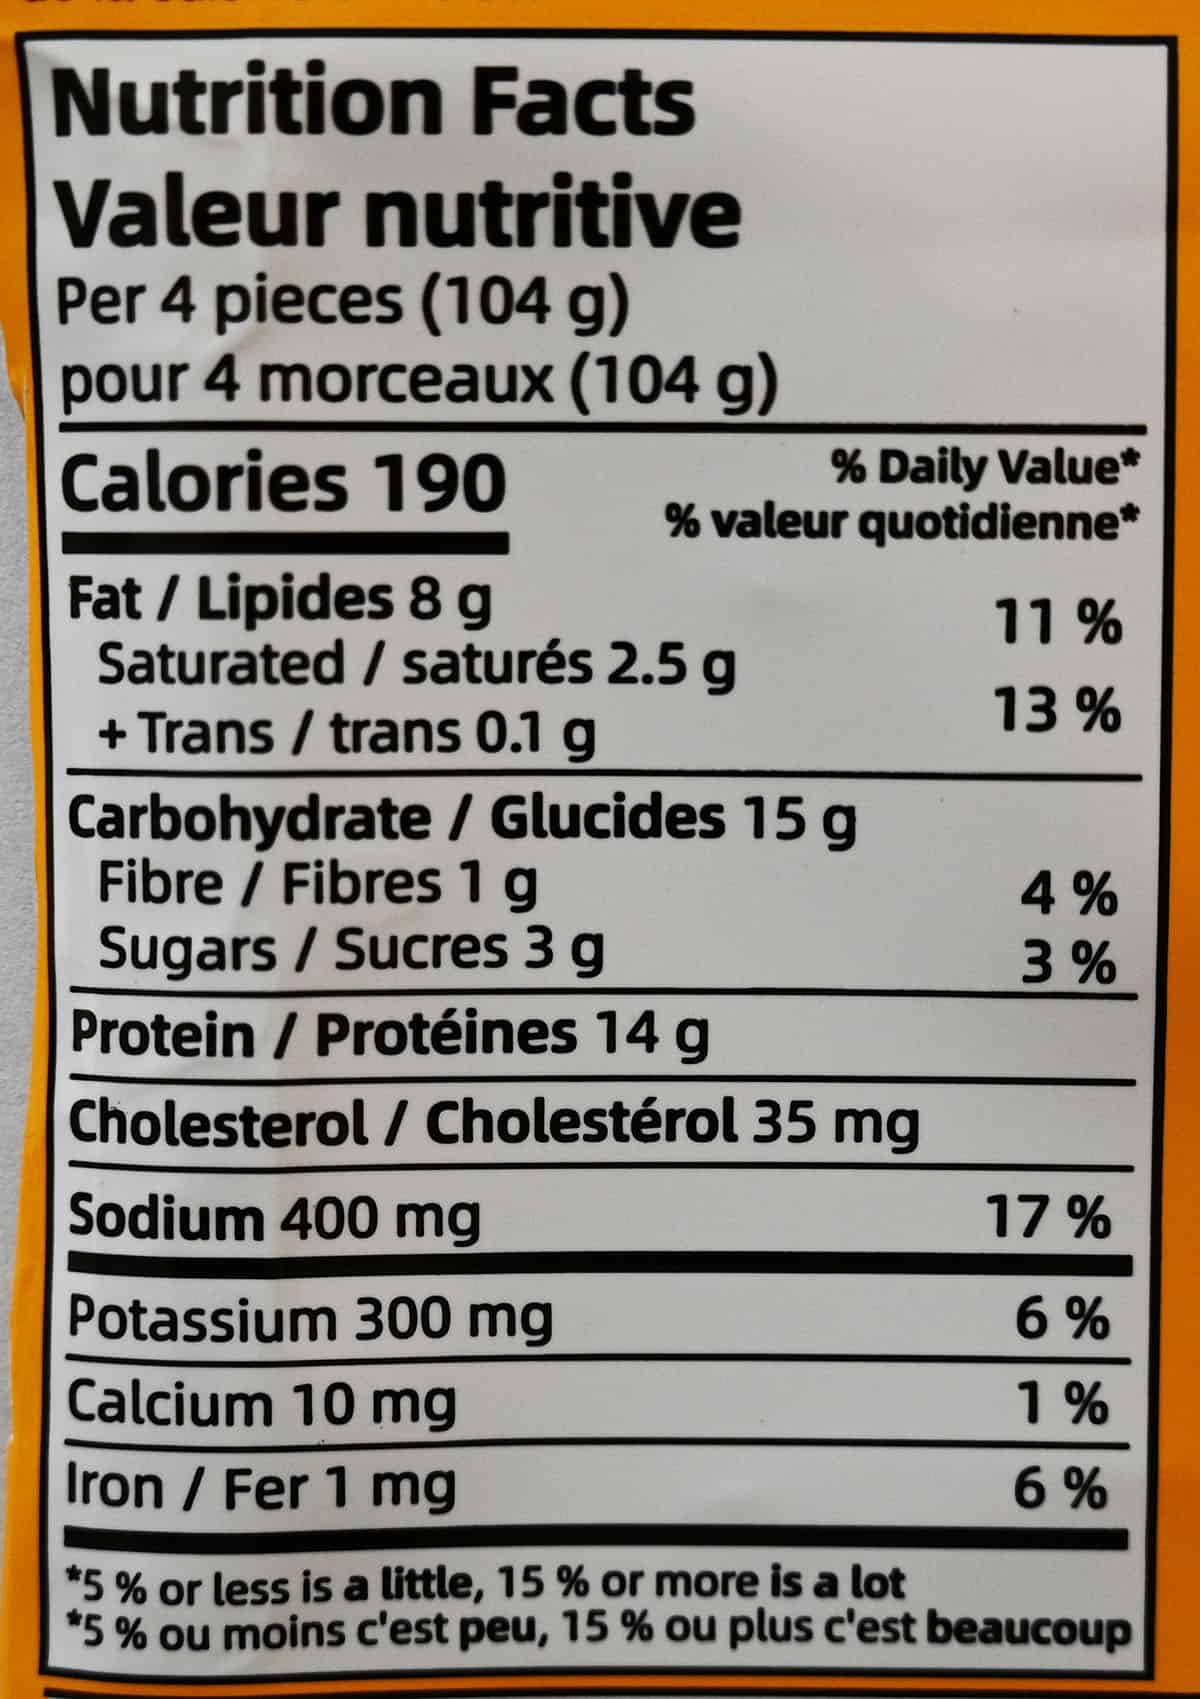 Image of the dumpling nutrition facts from the back of the package.